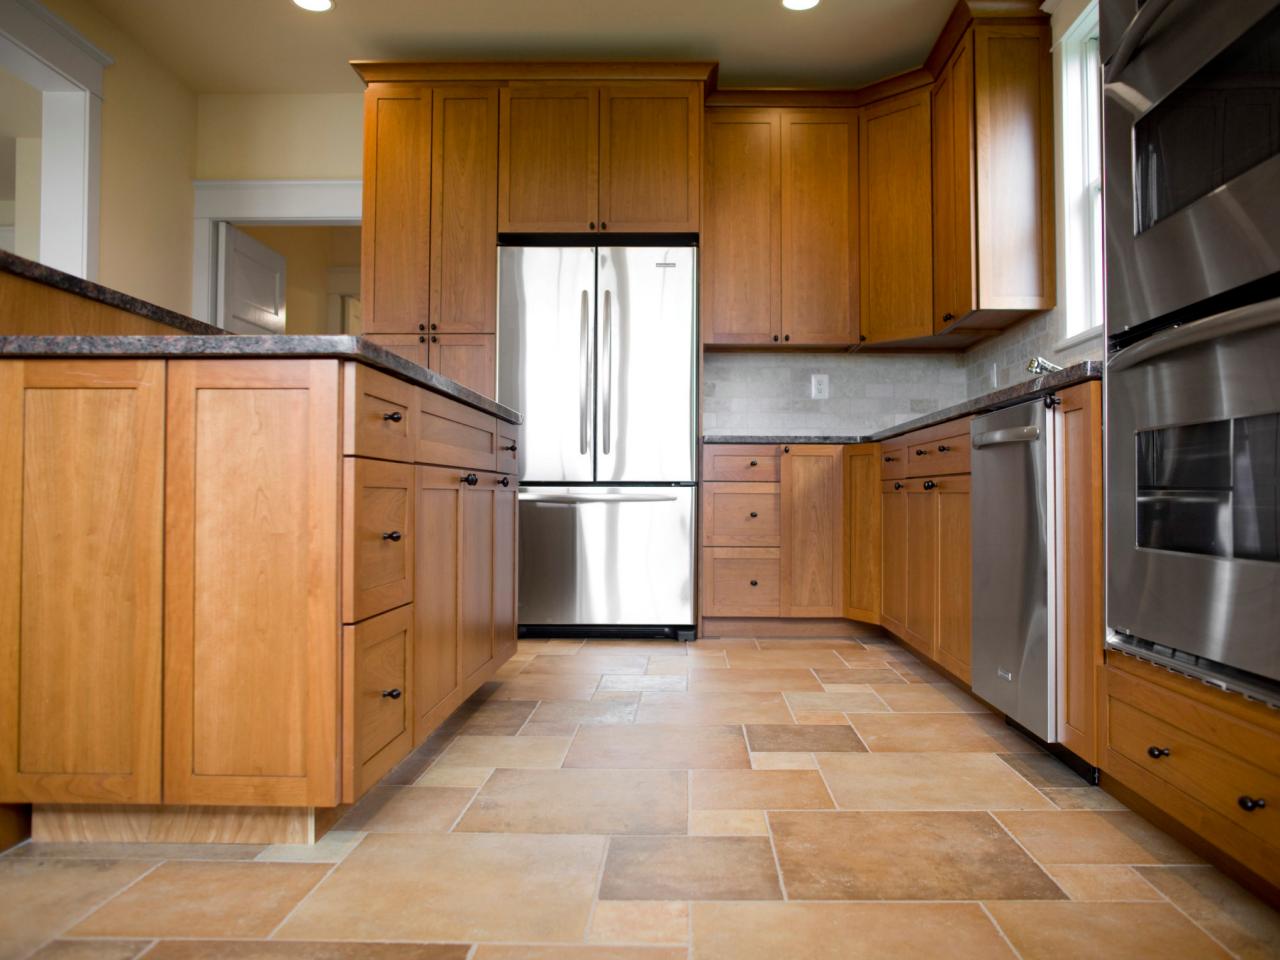 Kitchen flooring options choose the best flooring for your kitchen RXYHFJF